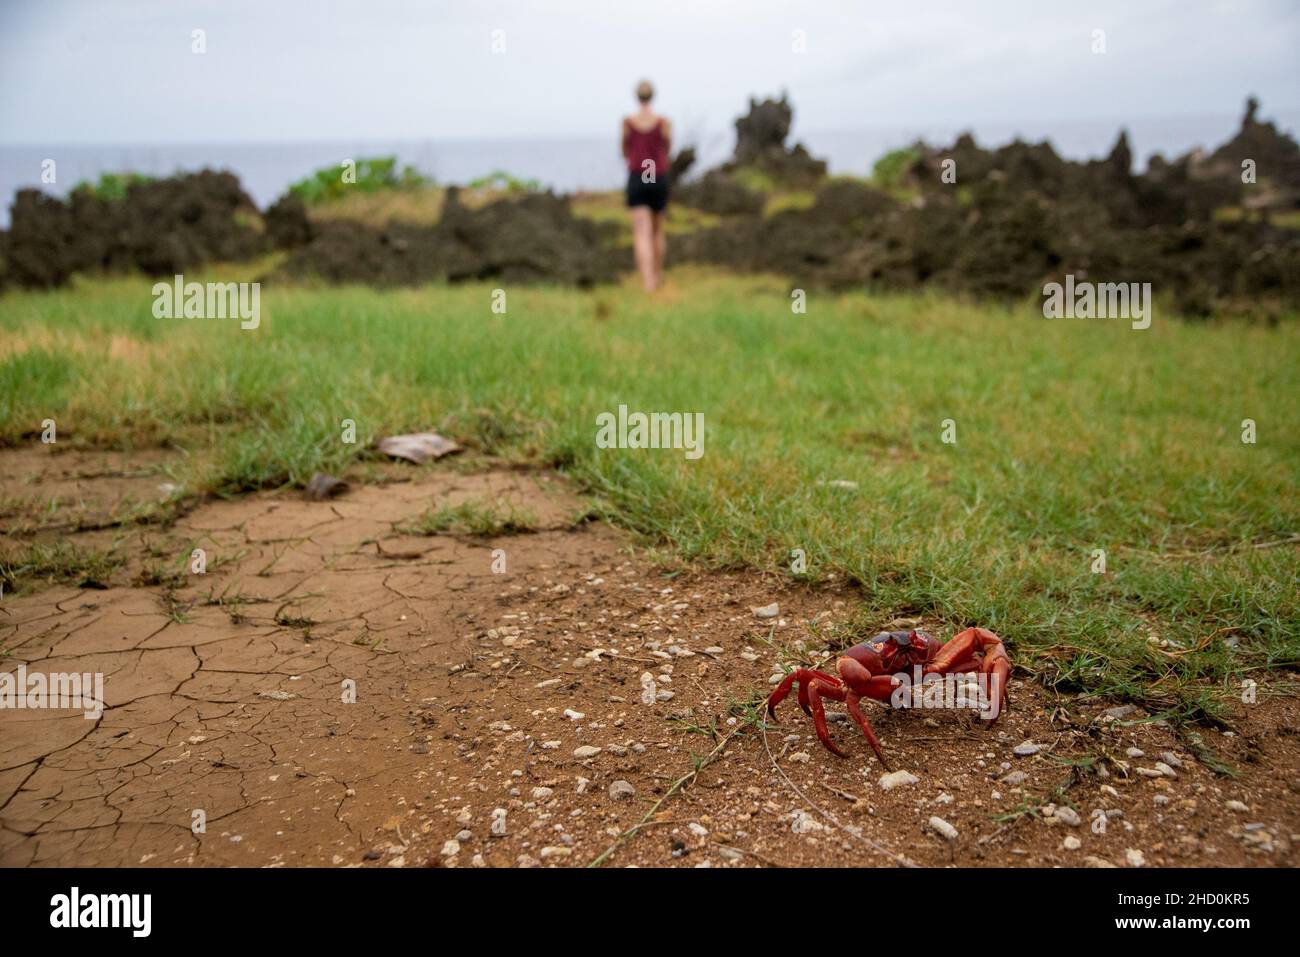 A mature red crab with a tourist in the background on Christmas Island. Stock Photo